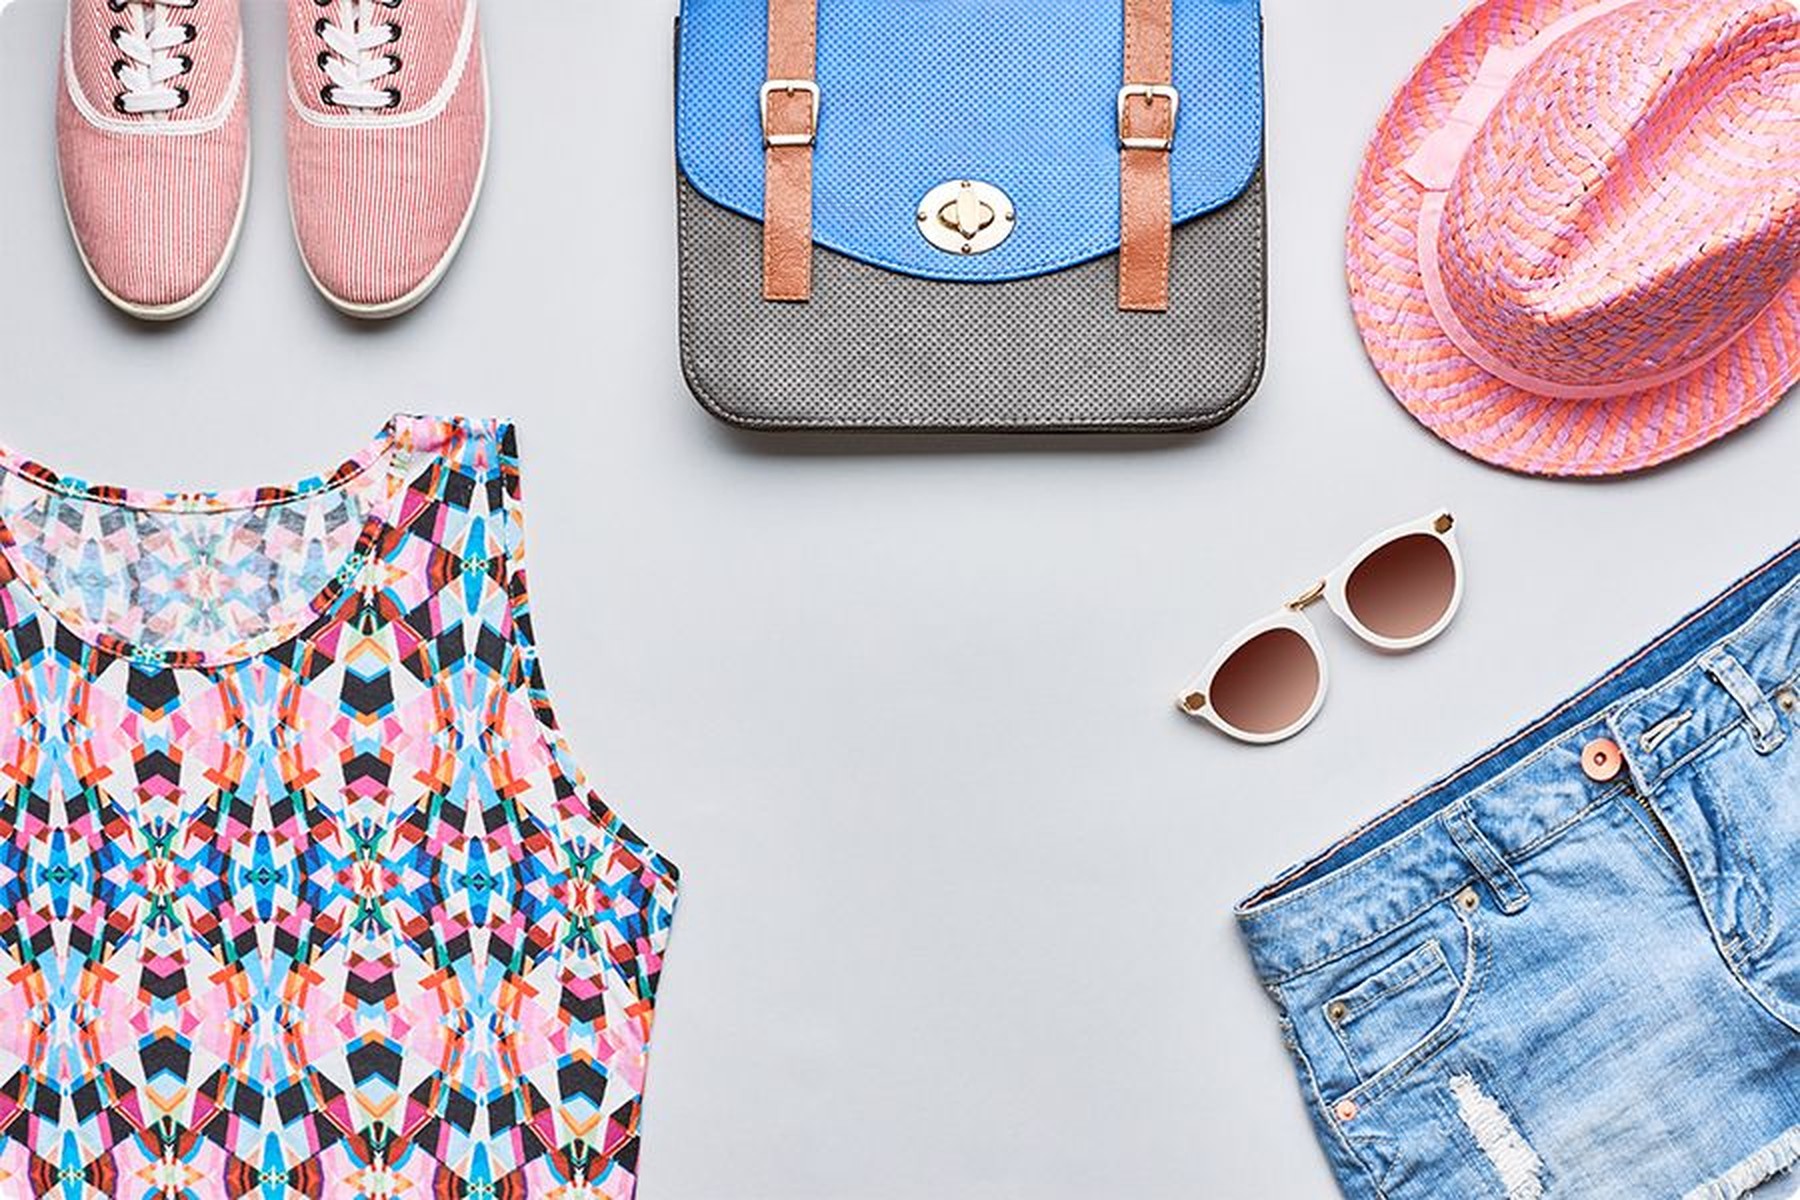 Enjoy huge savings with an Urban Outfitters coupon code